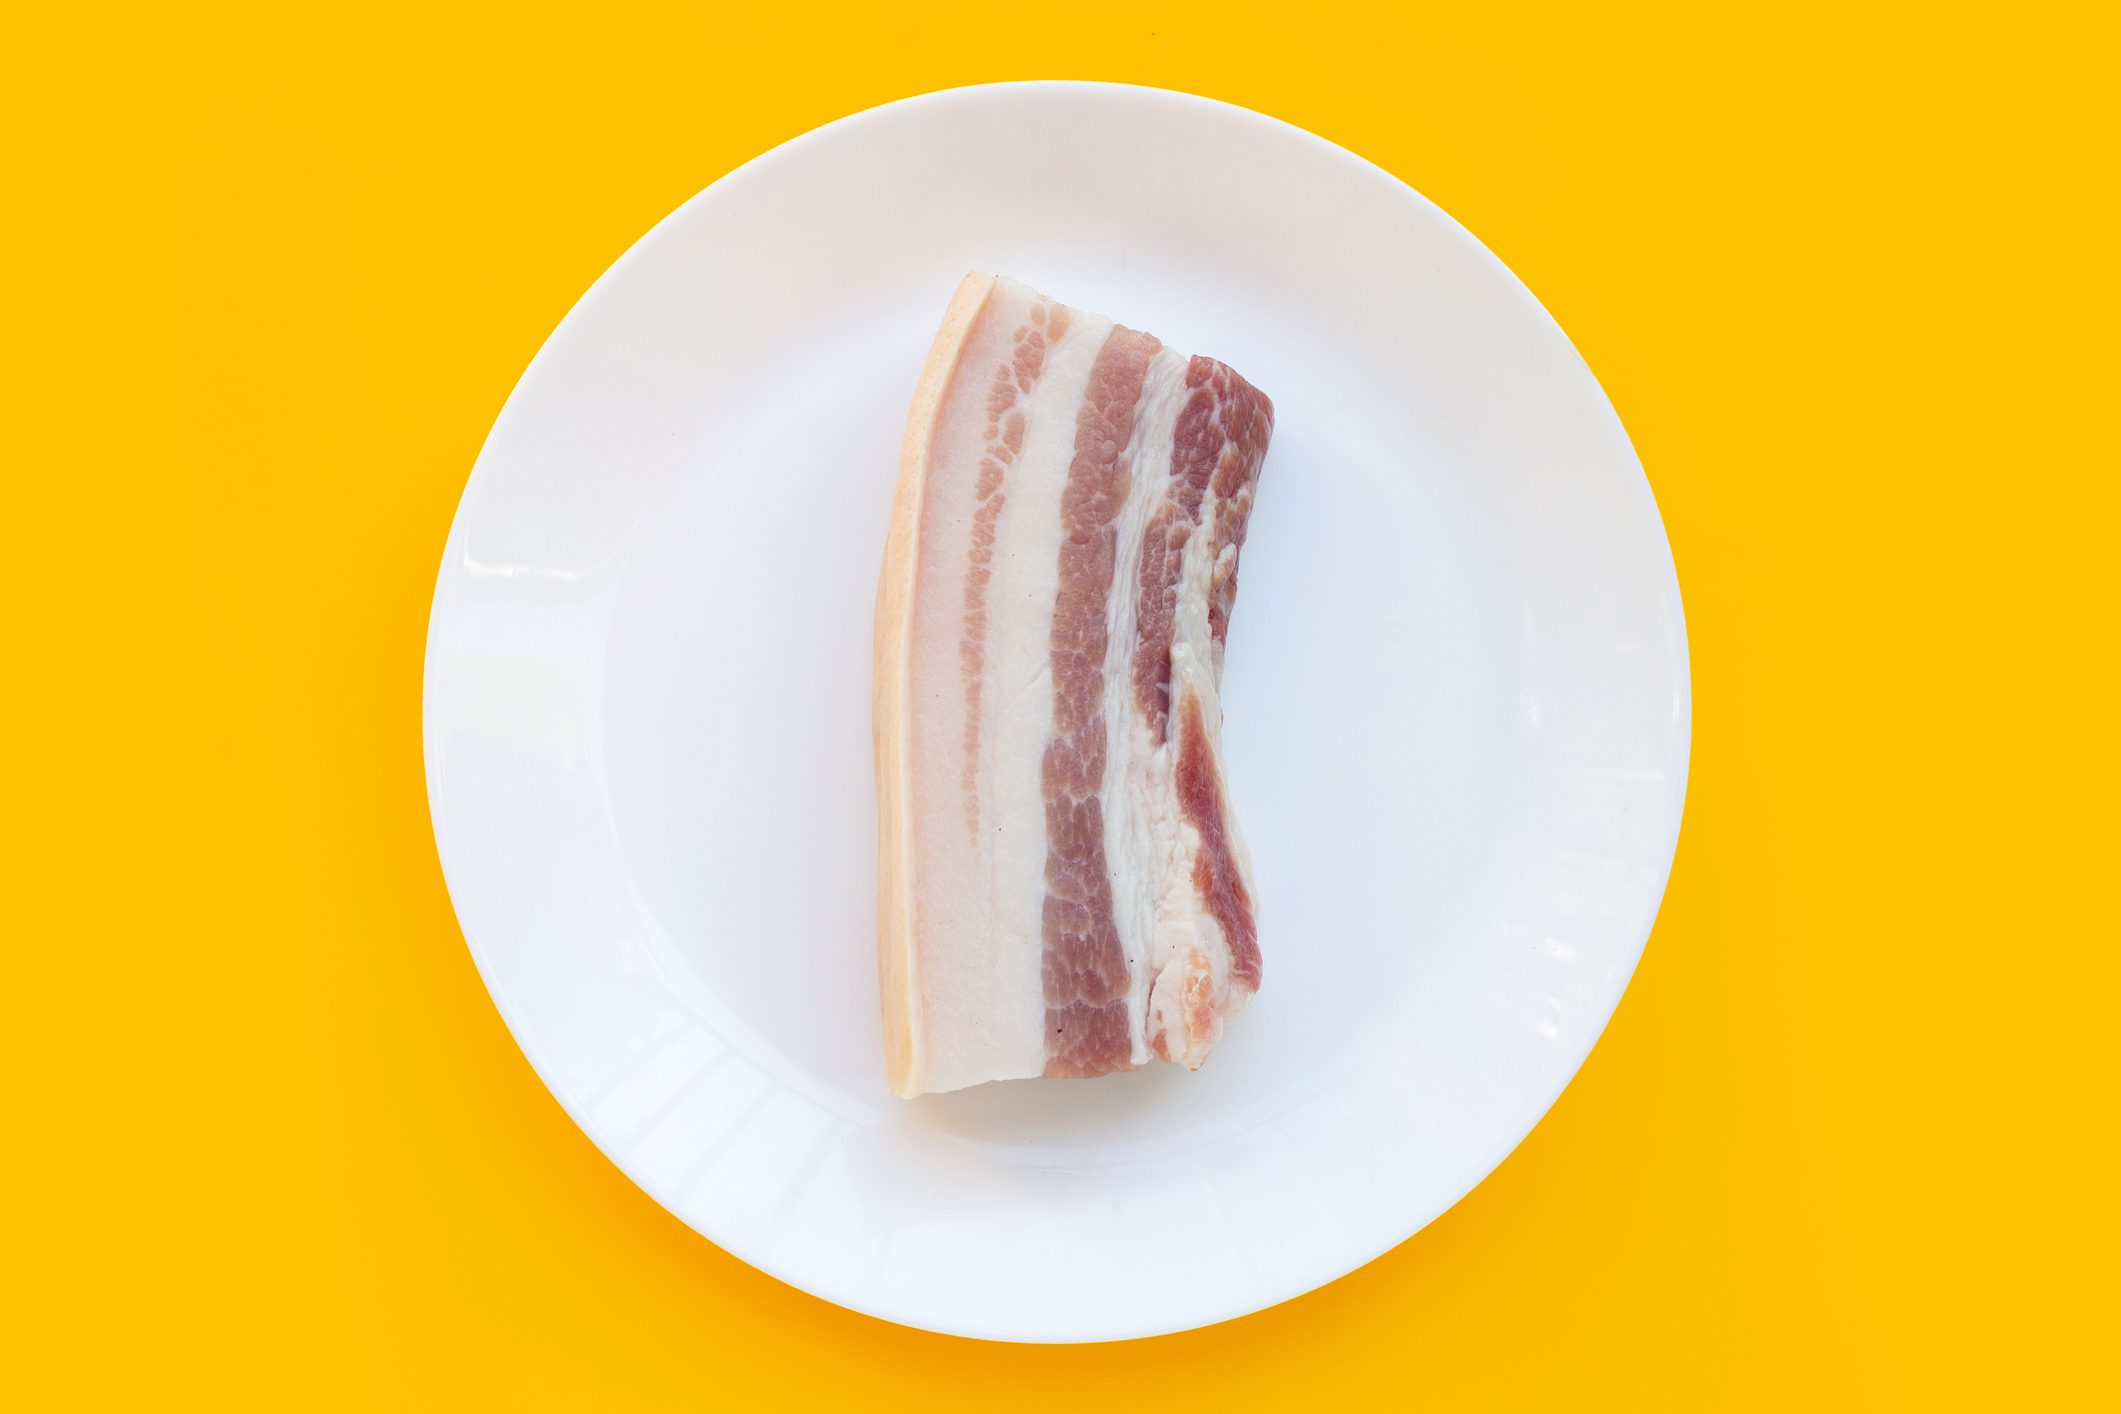 Streaky pork in white plate on yellow background.